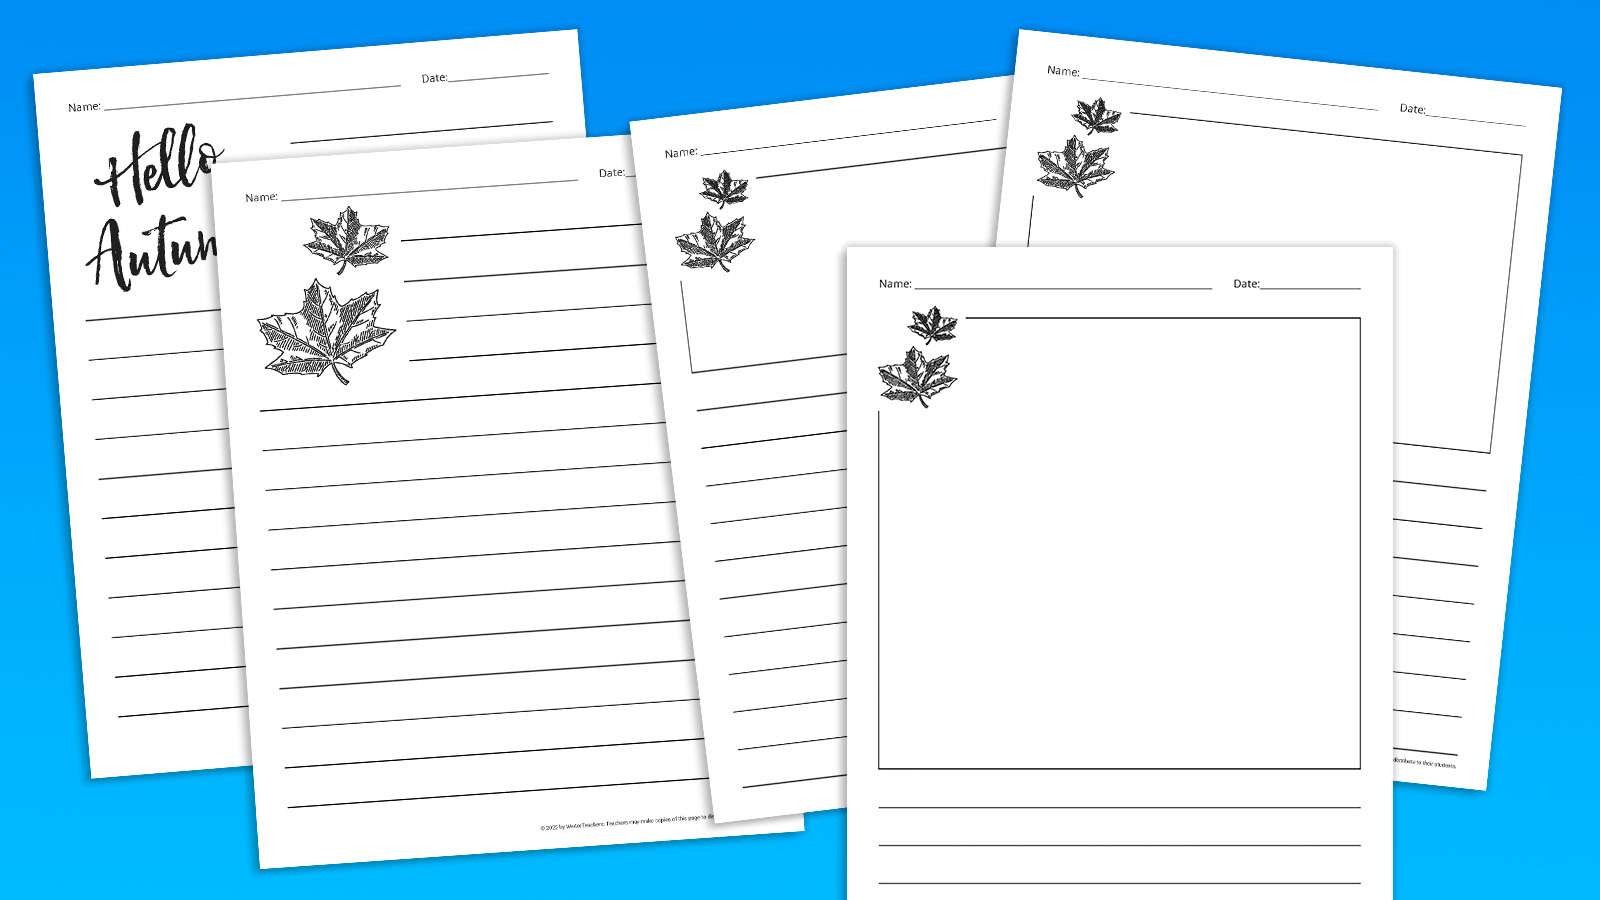 Printable Primary Lined Paper  Lined writing paper, Writing paper template,  Printable lined paper